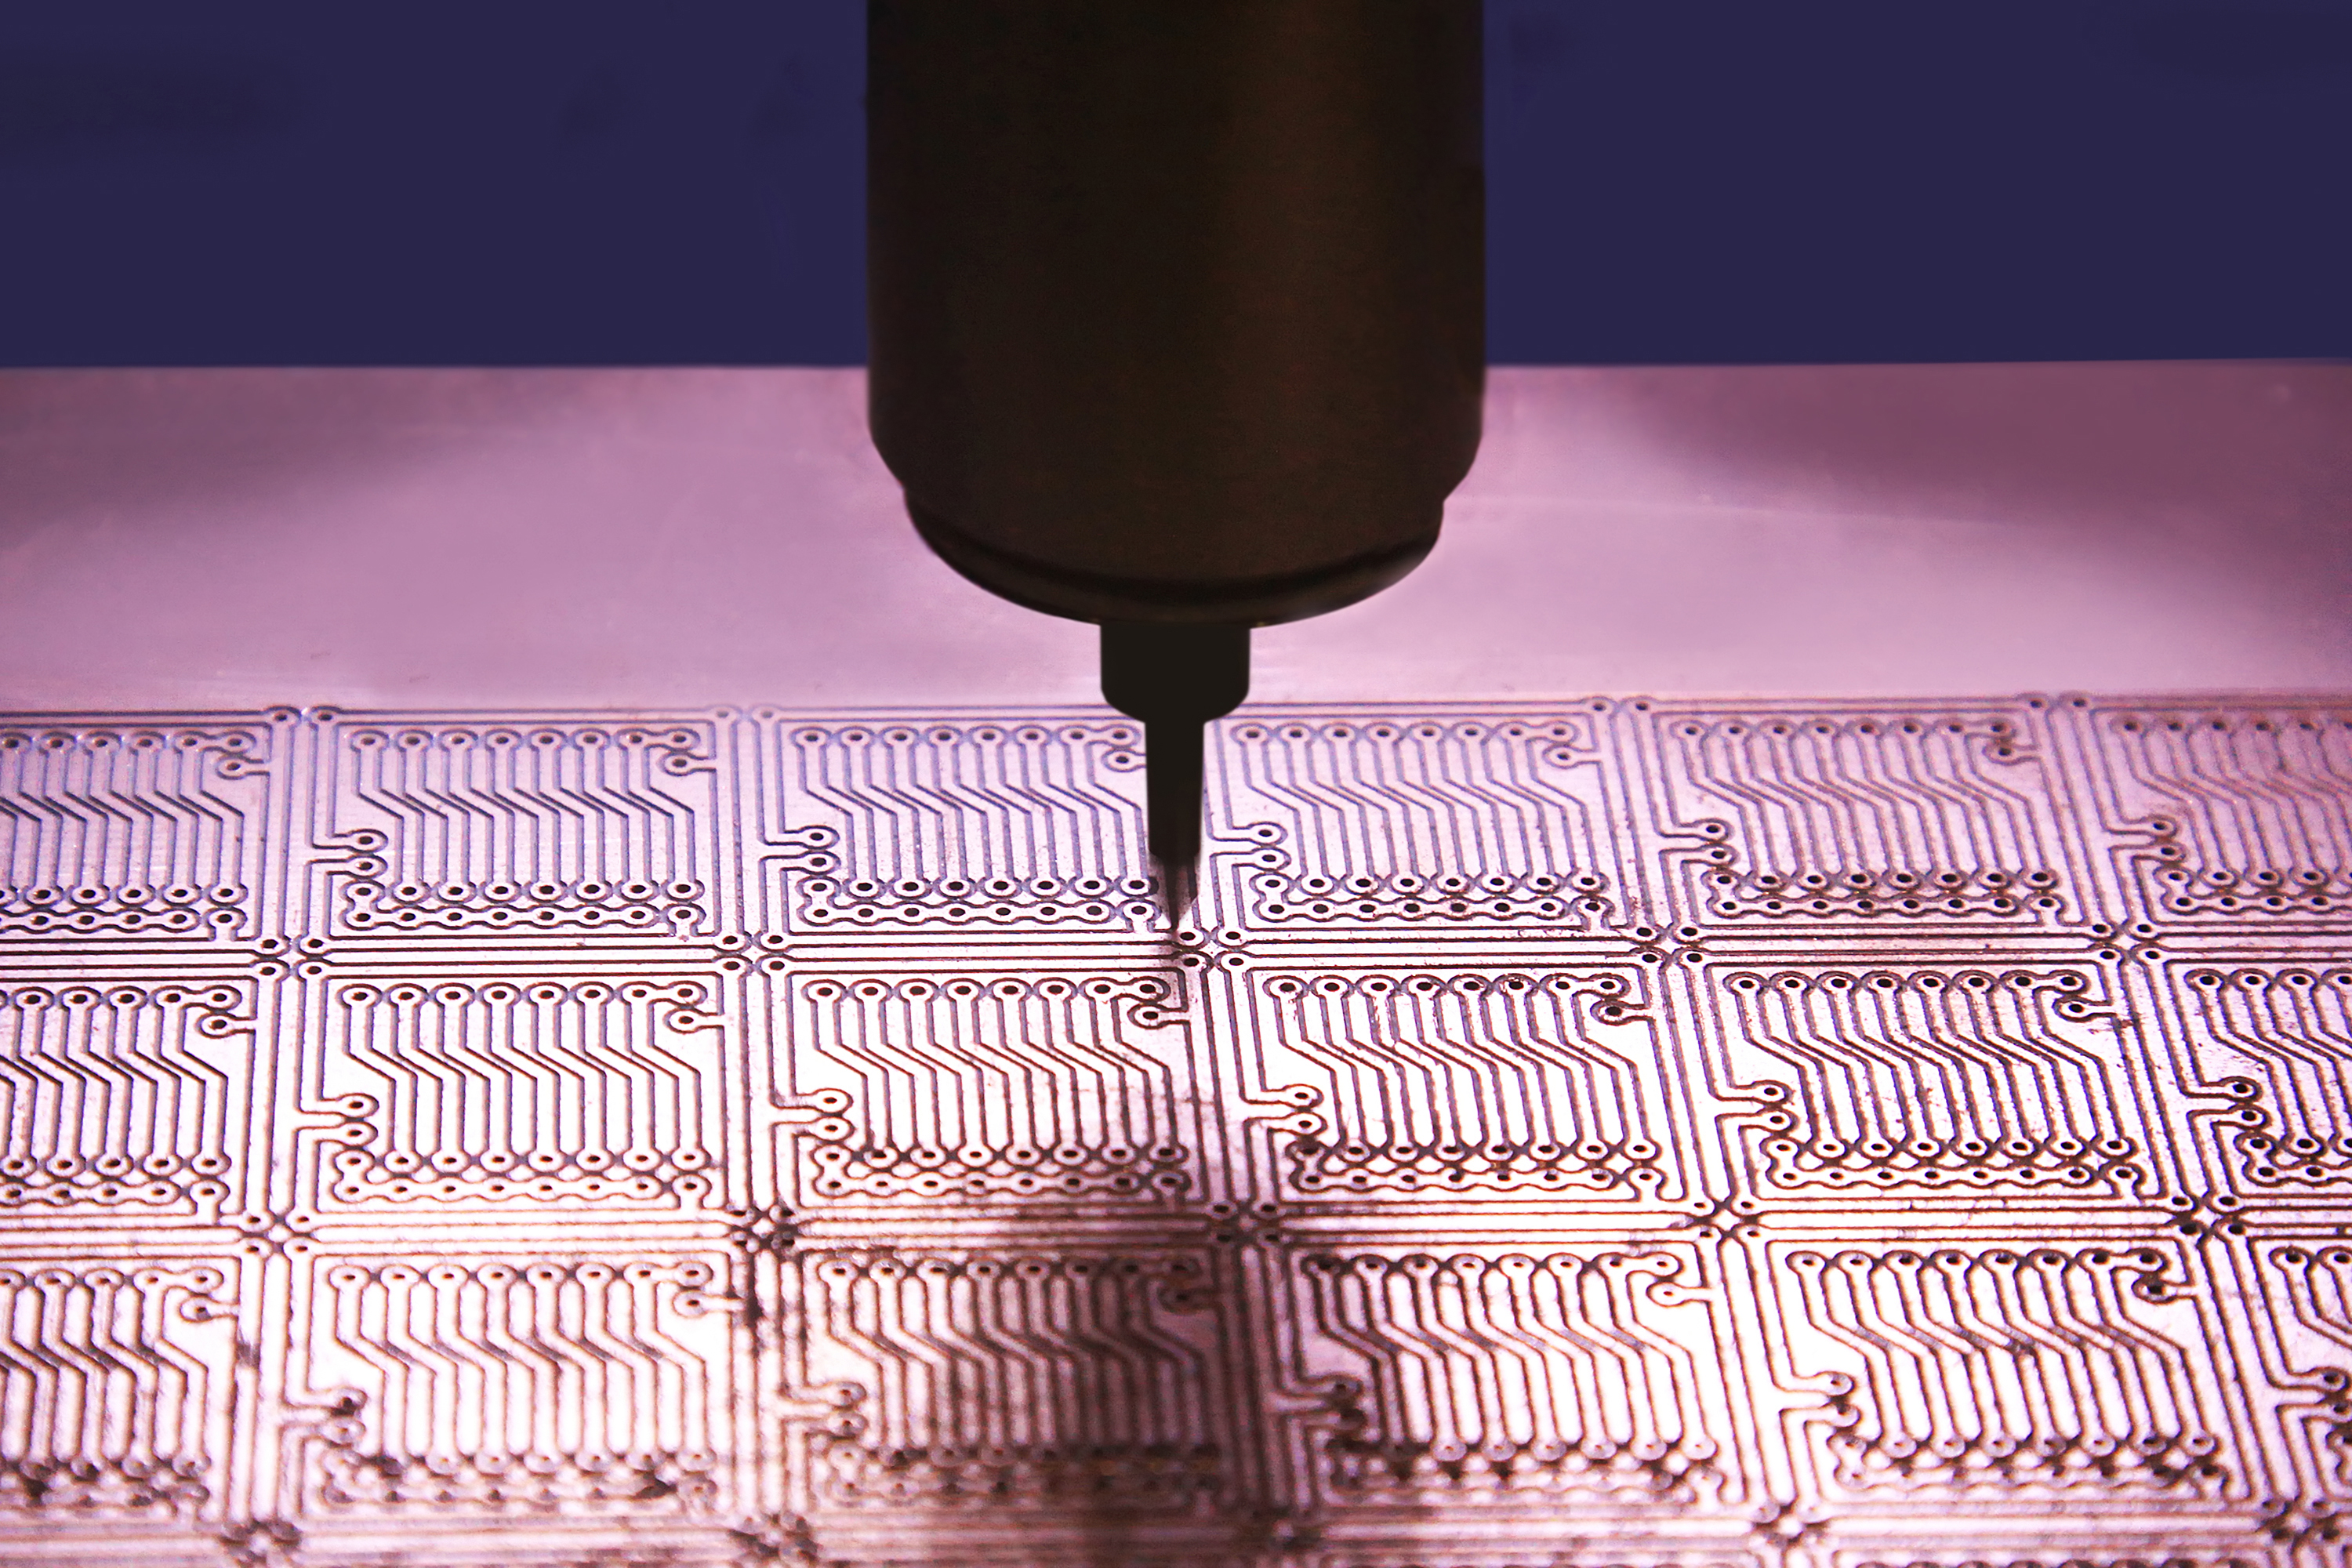 production of printed circuit boards.